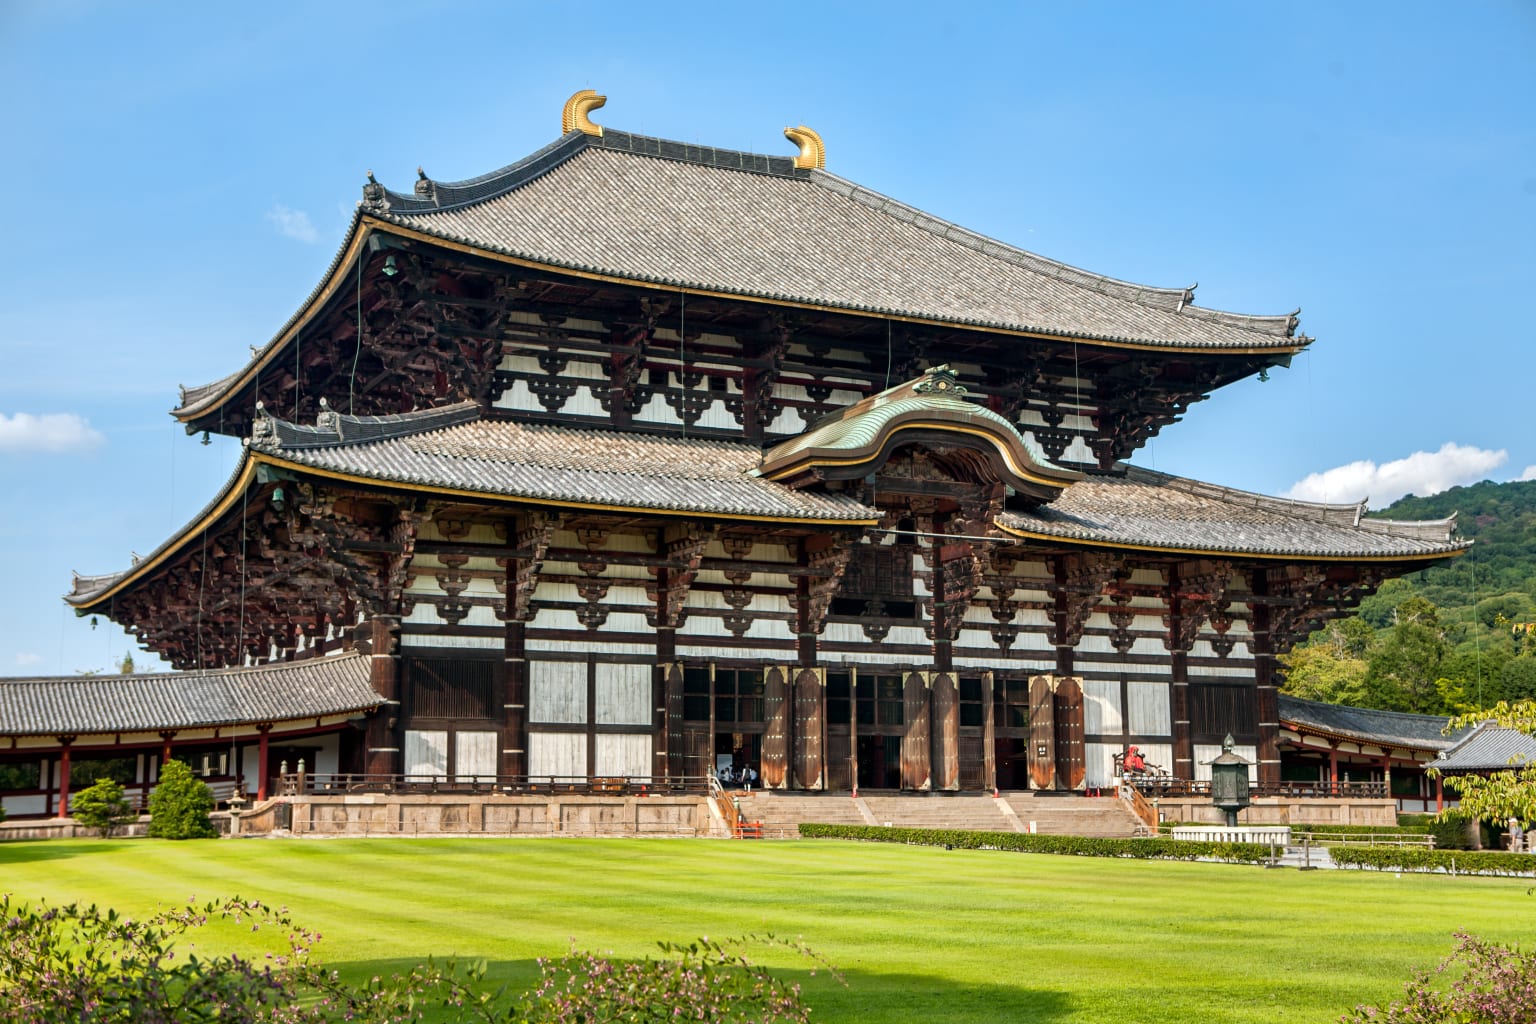 The outside of a building in Nara, Japan.